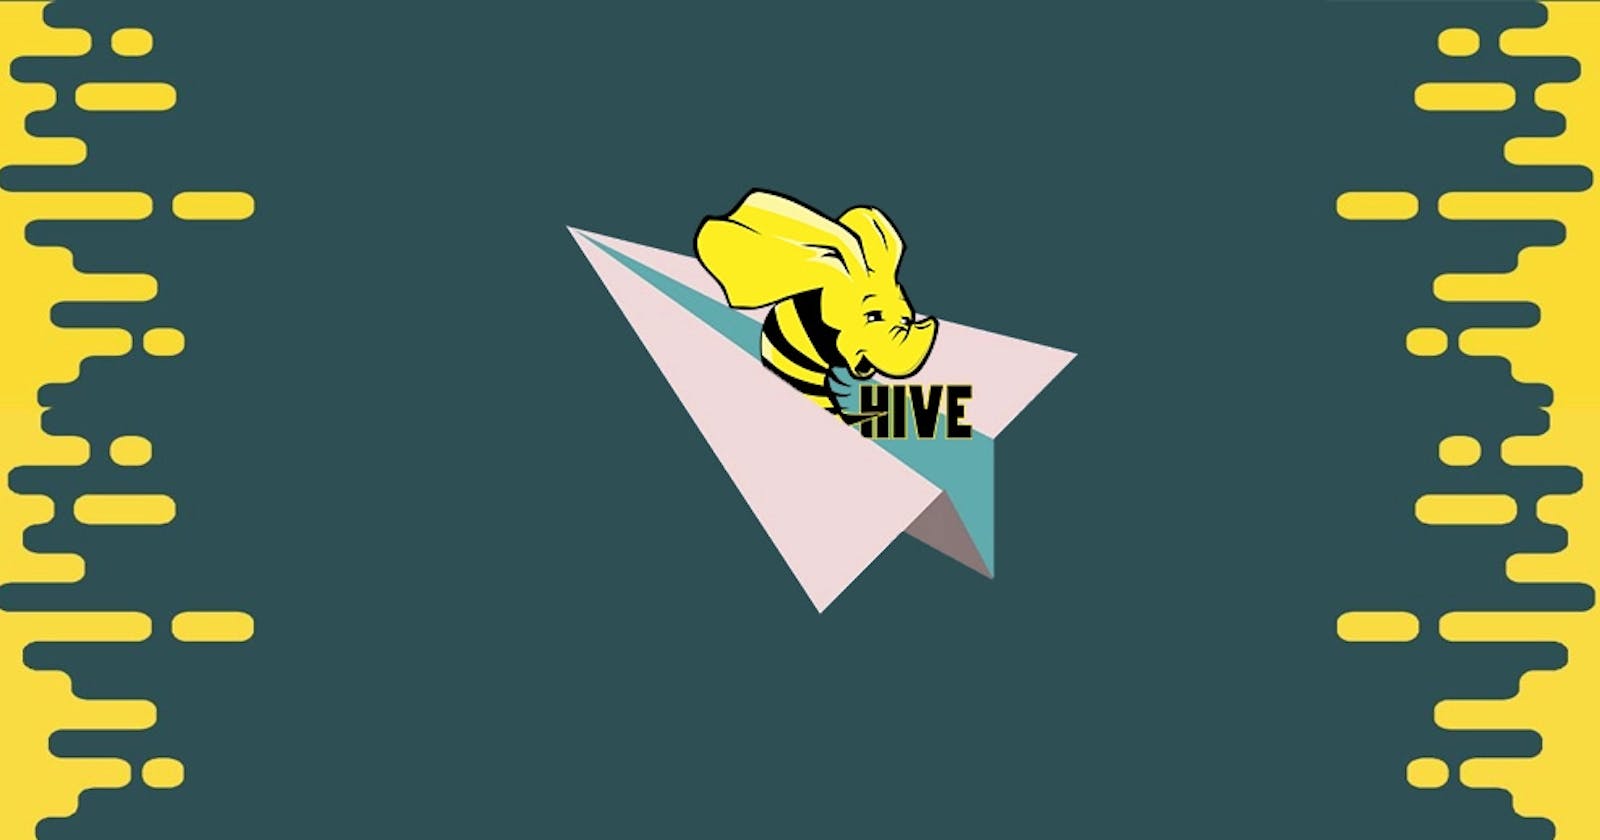 Introduction to Hive